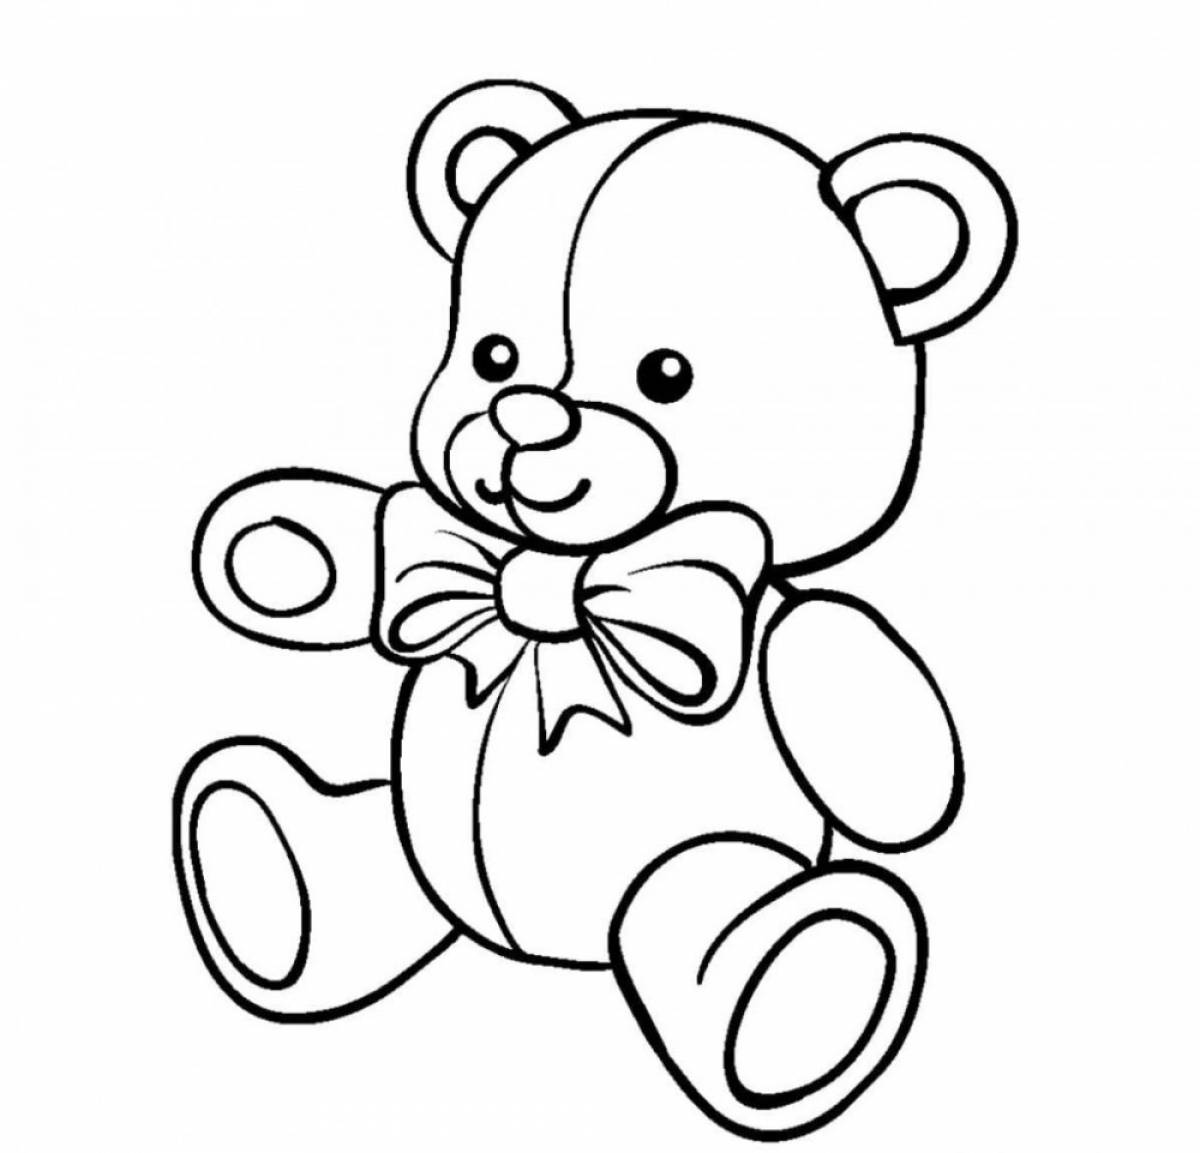 Coloring page gorgeous bear with a bow